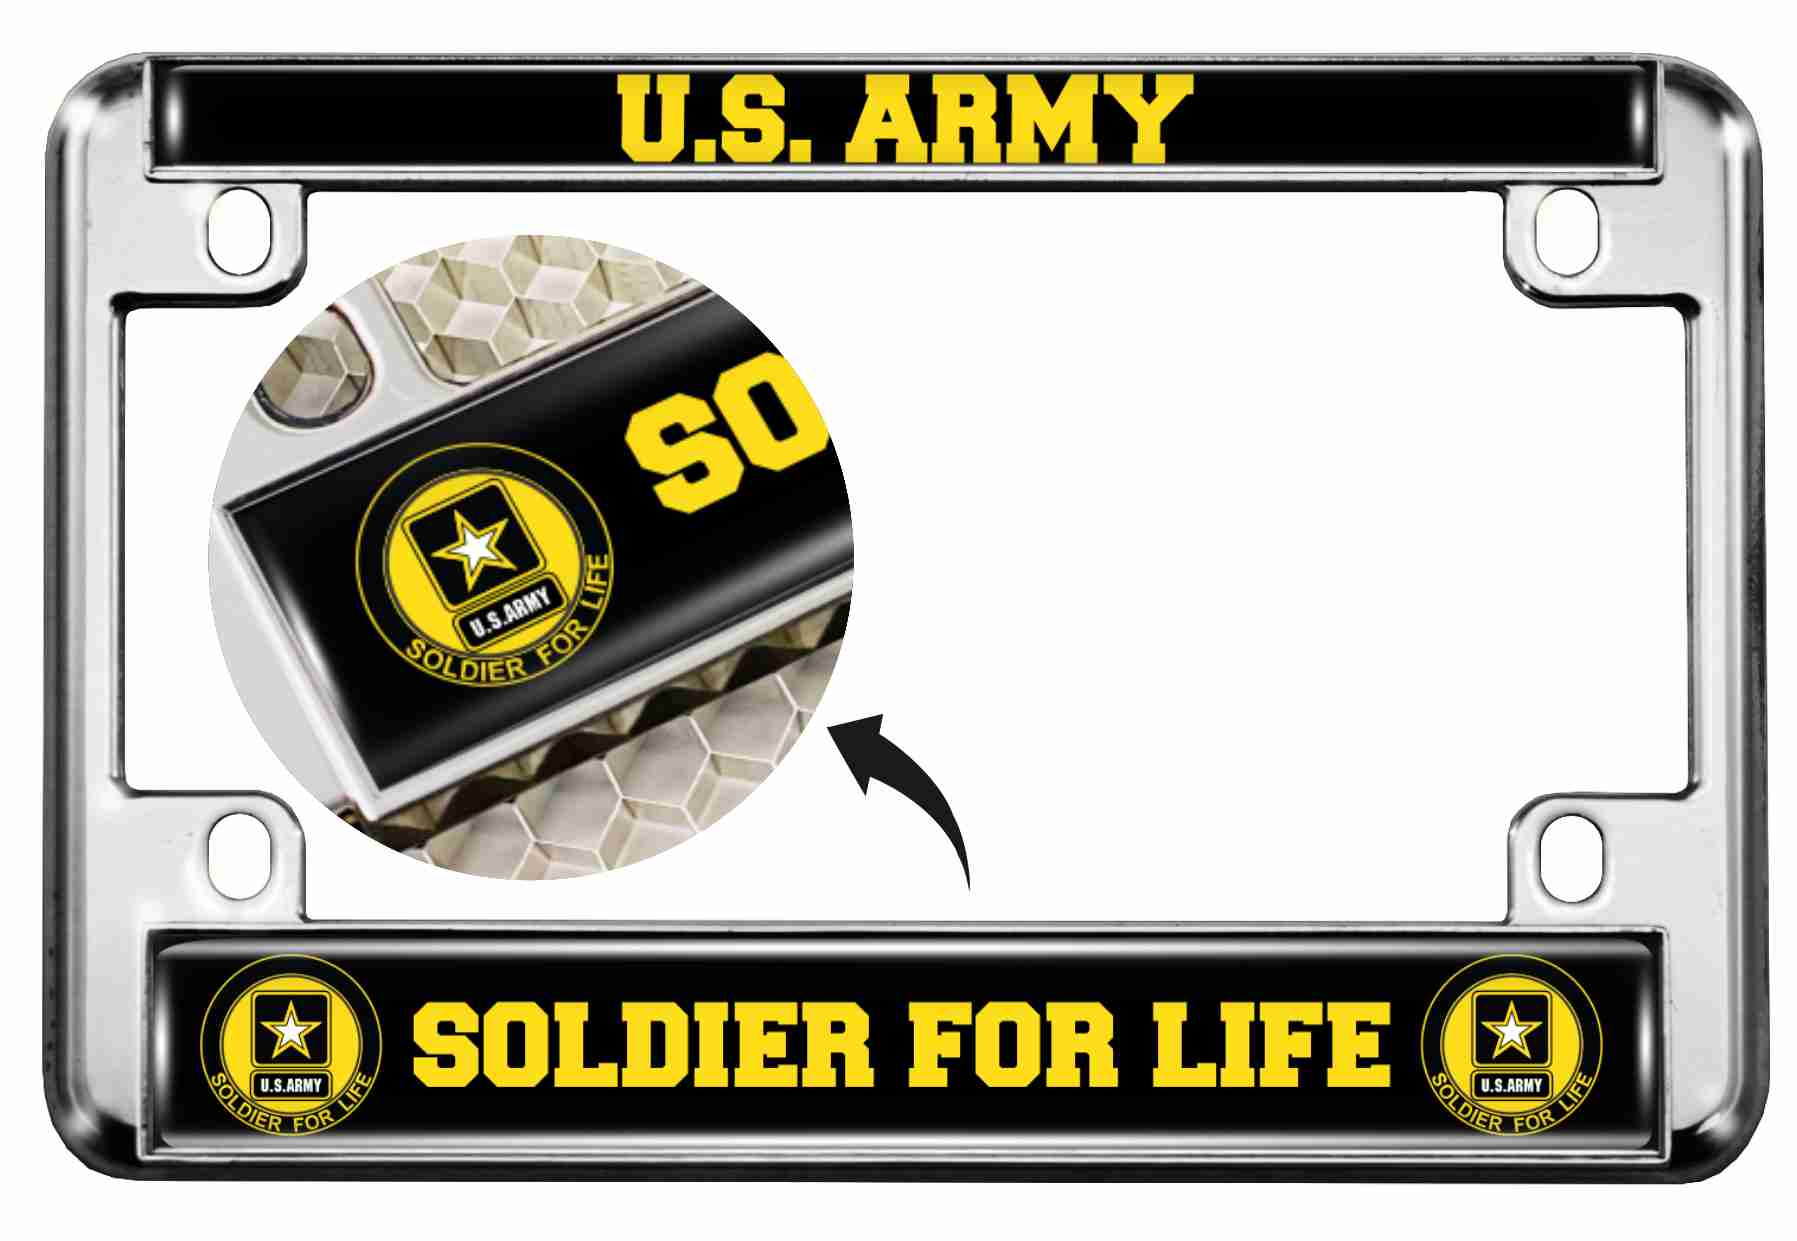 U.S. Army Soldier for Life - Motorcycle Metal License Plate Frame